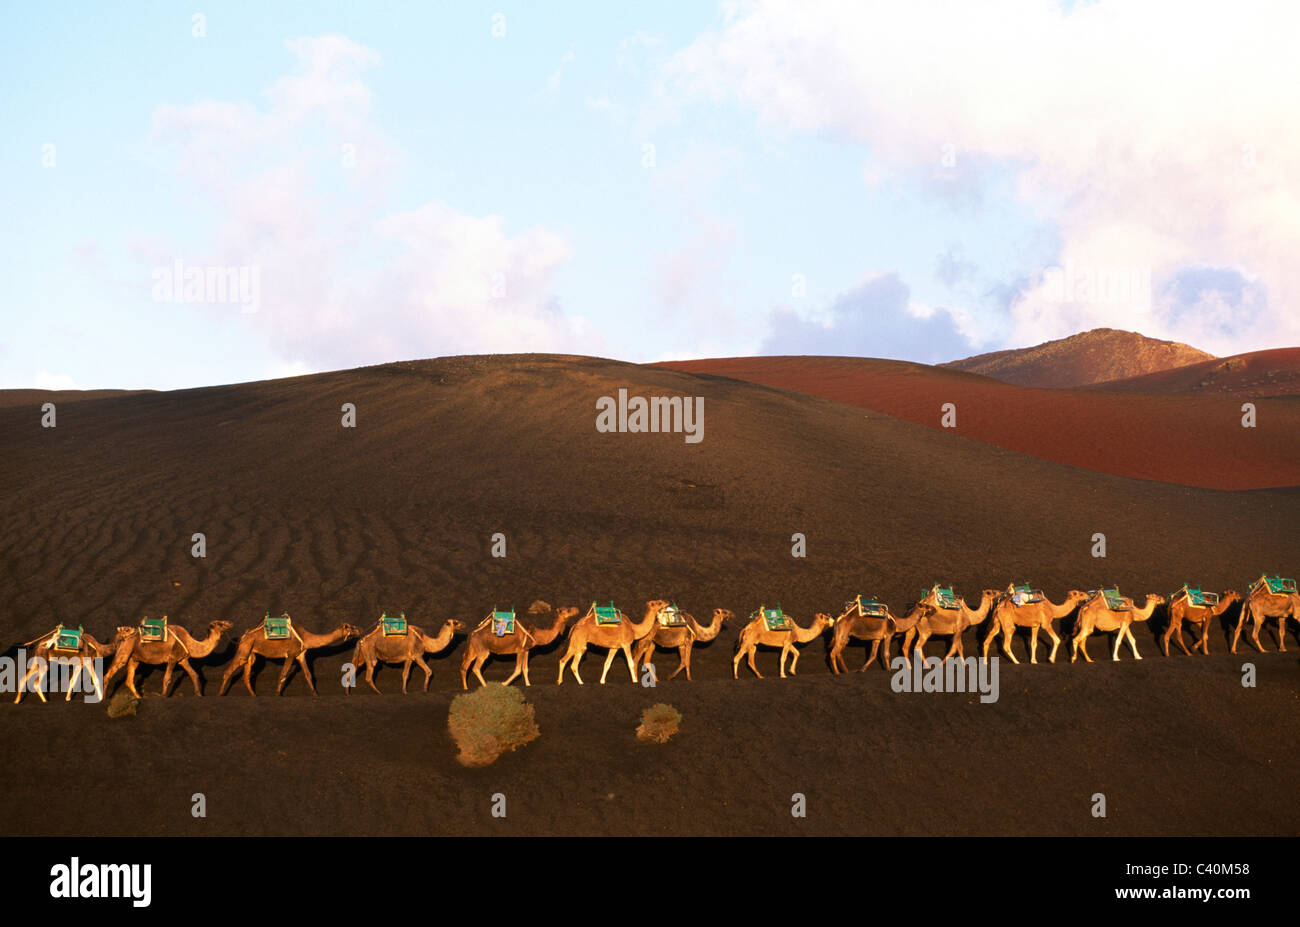 Camels, horse riding, excursions, Timanfaya, national parks, Lanzarote, Canary islands, isles, Spain Stock Photo